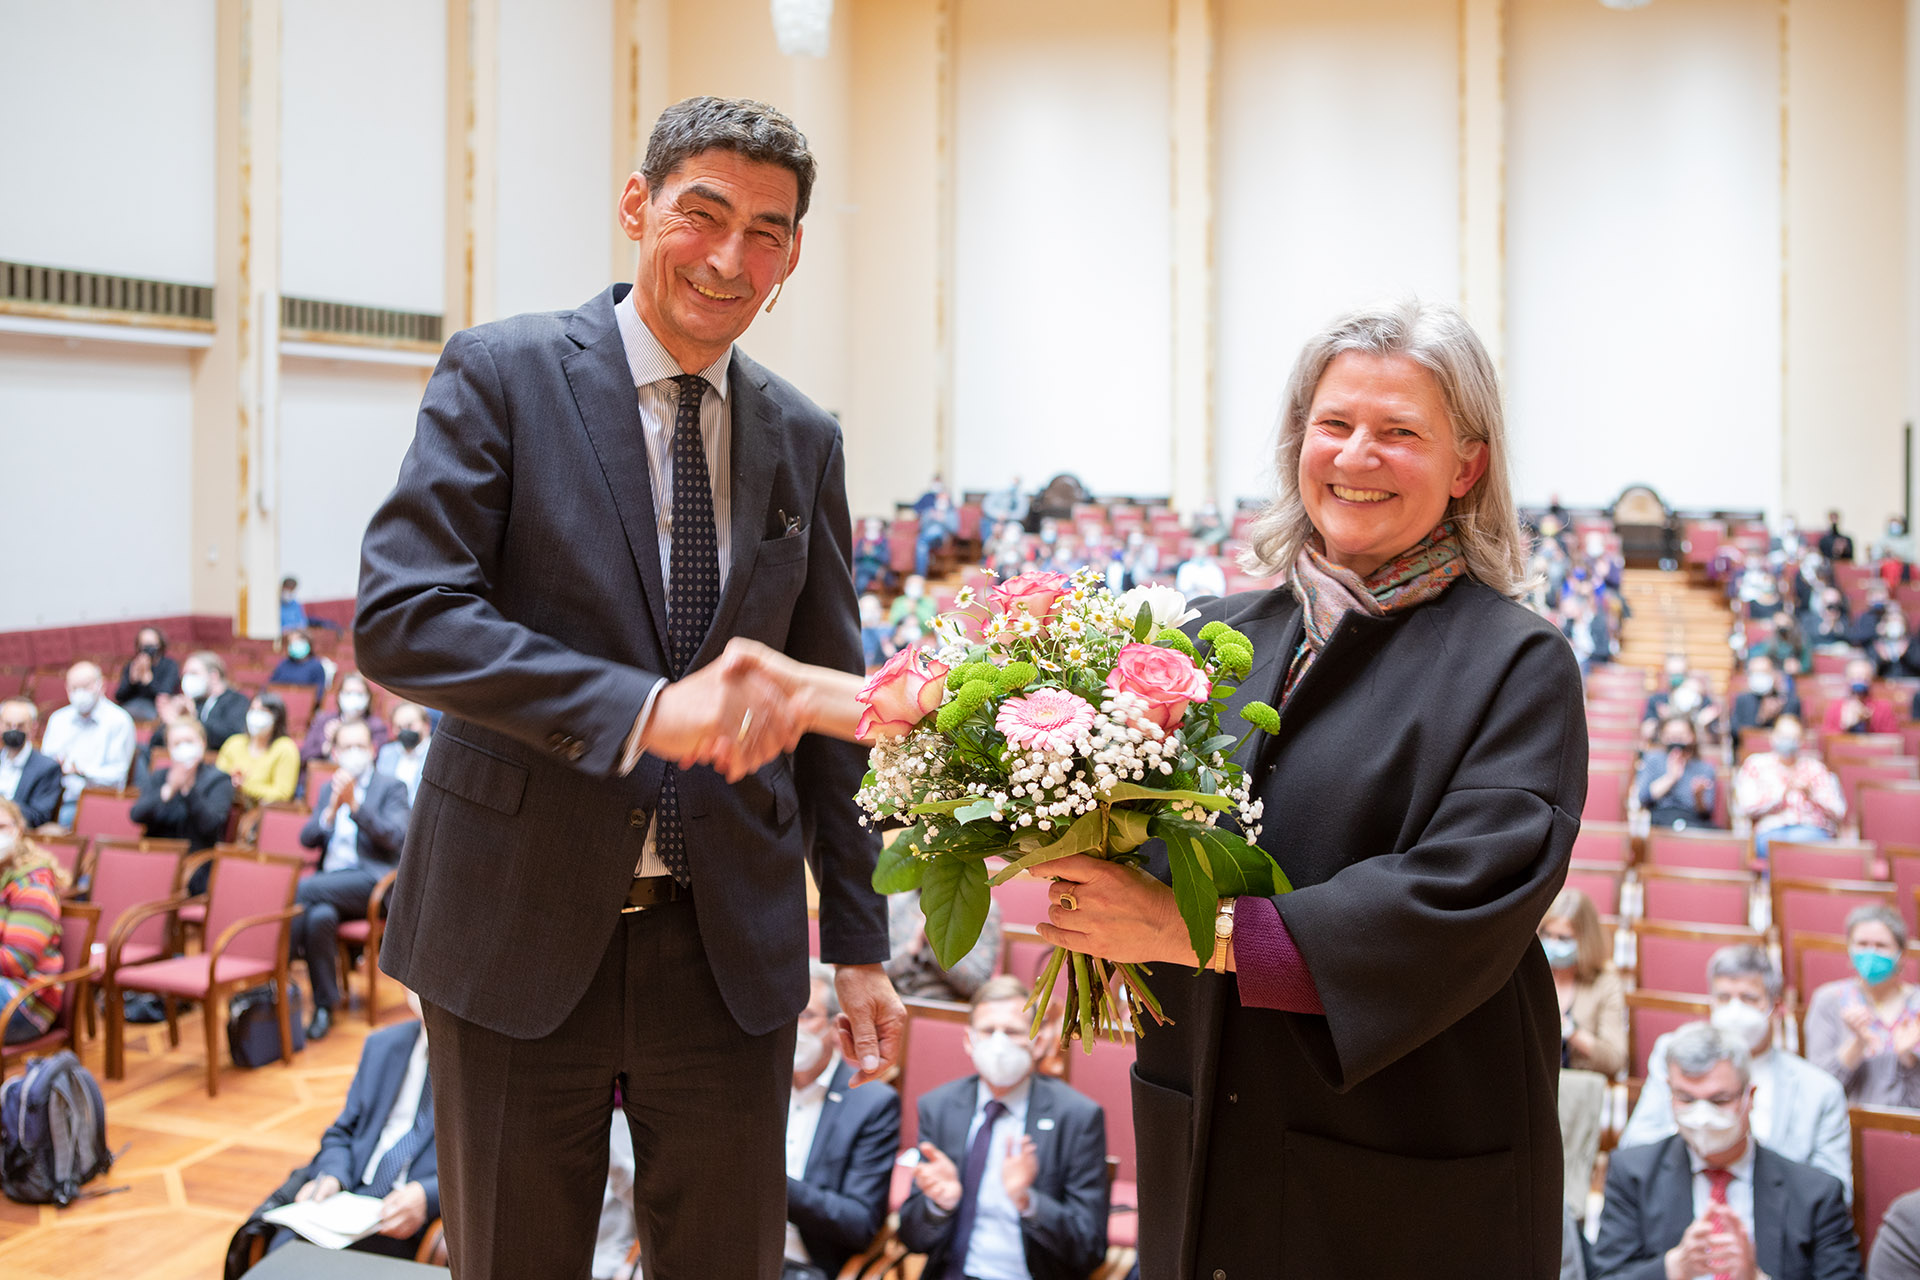 Bernhard Sibold shakes Karla Pollmann's hand, she holds a bouquet of flowers in her other hand.